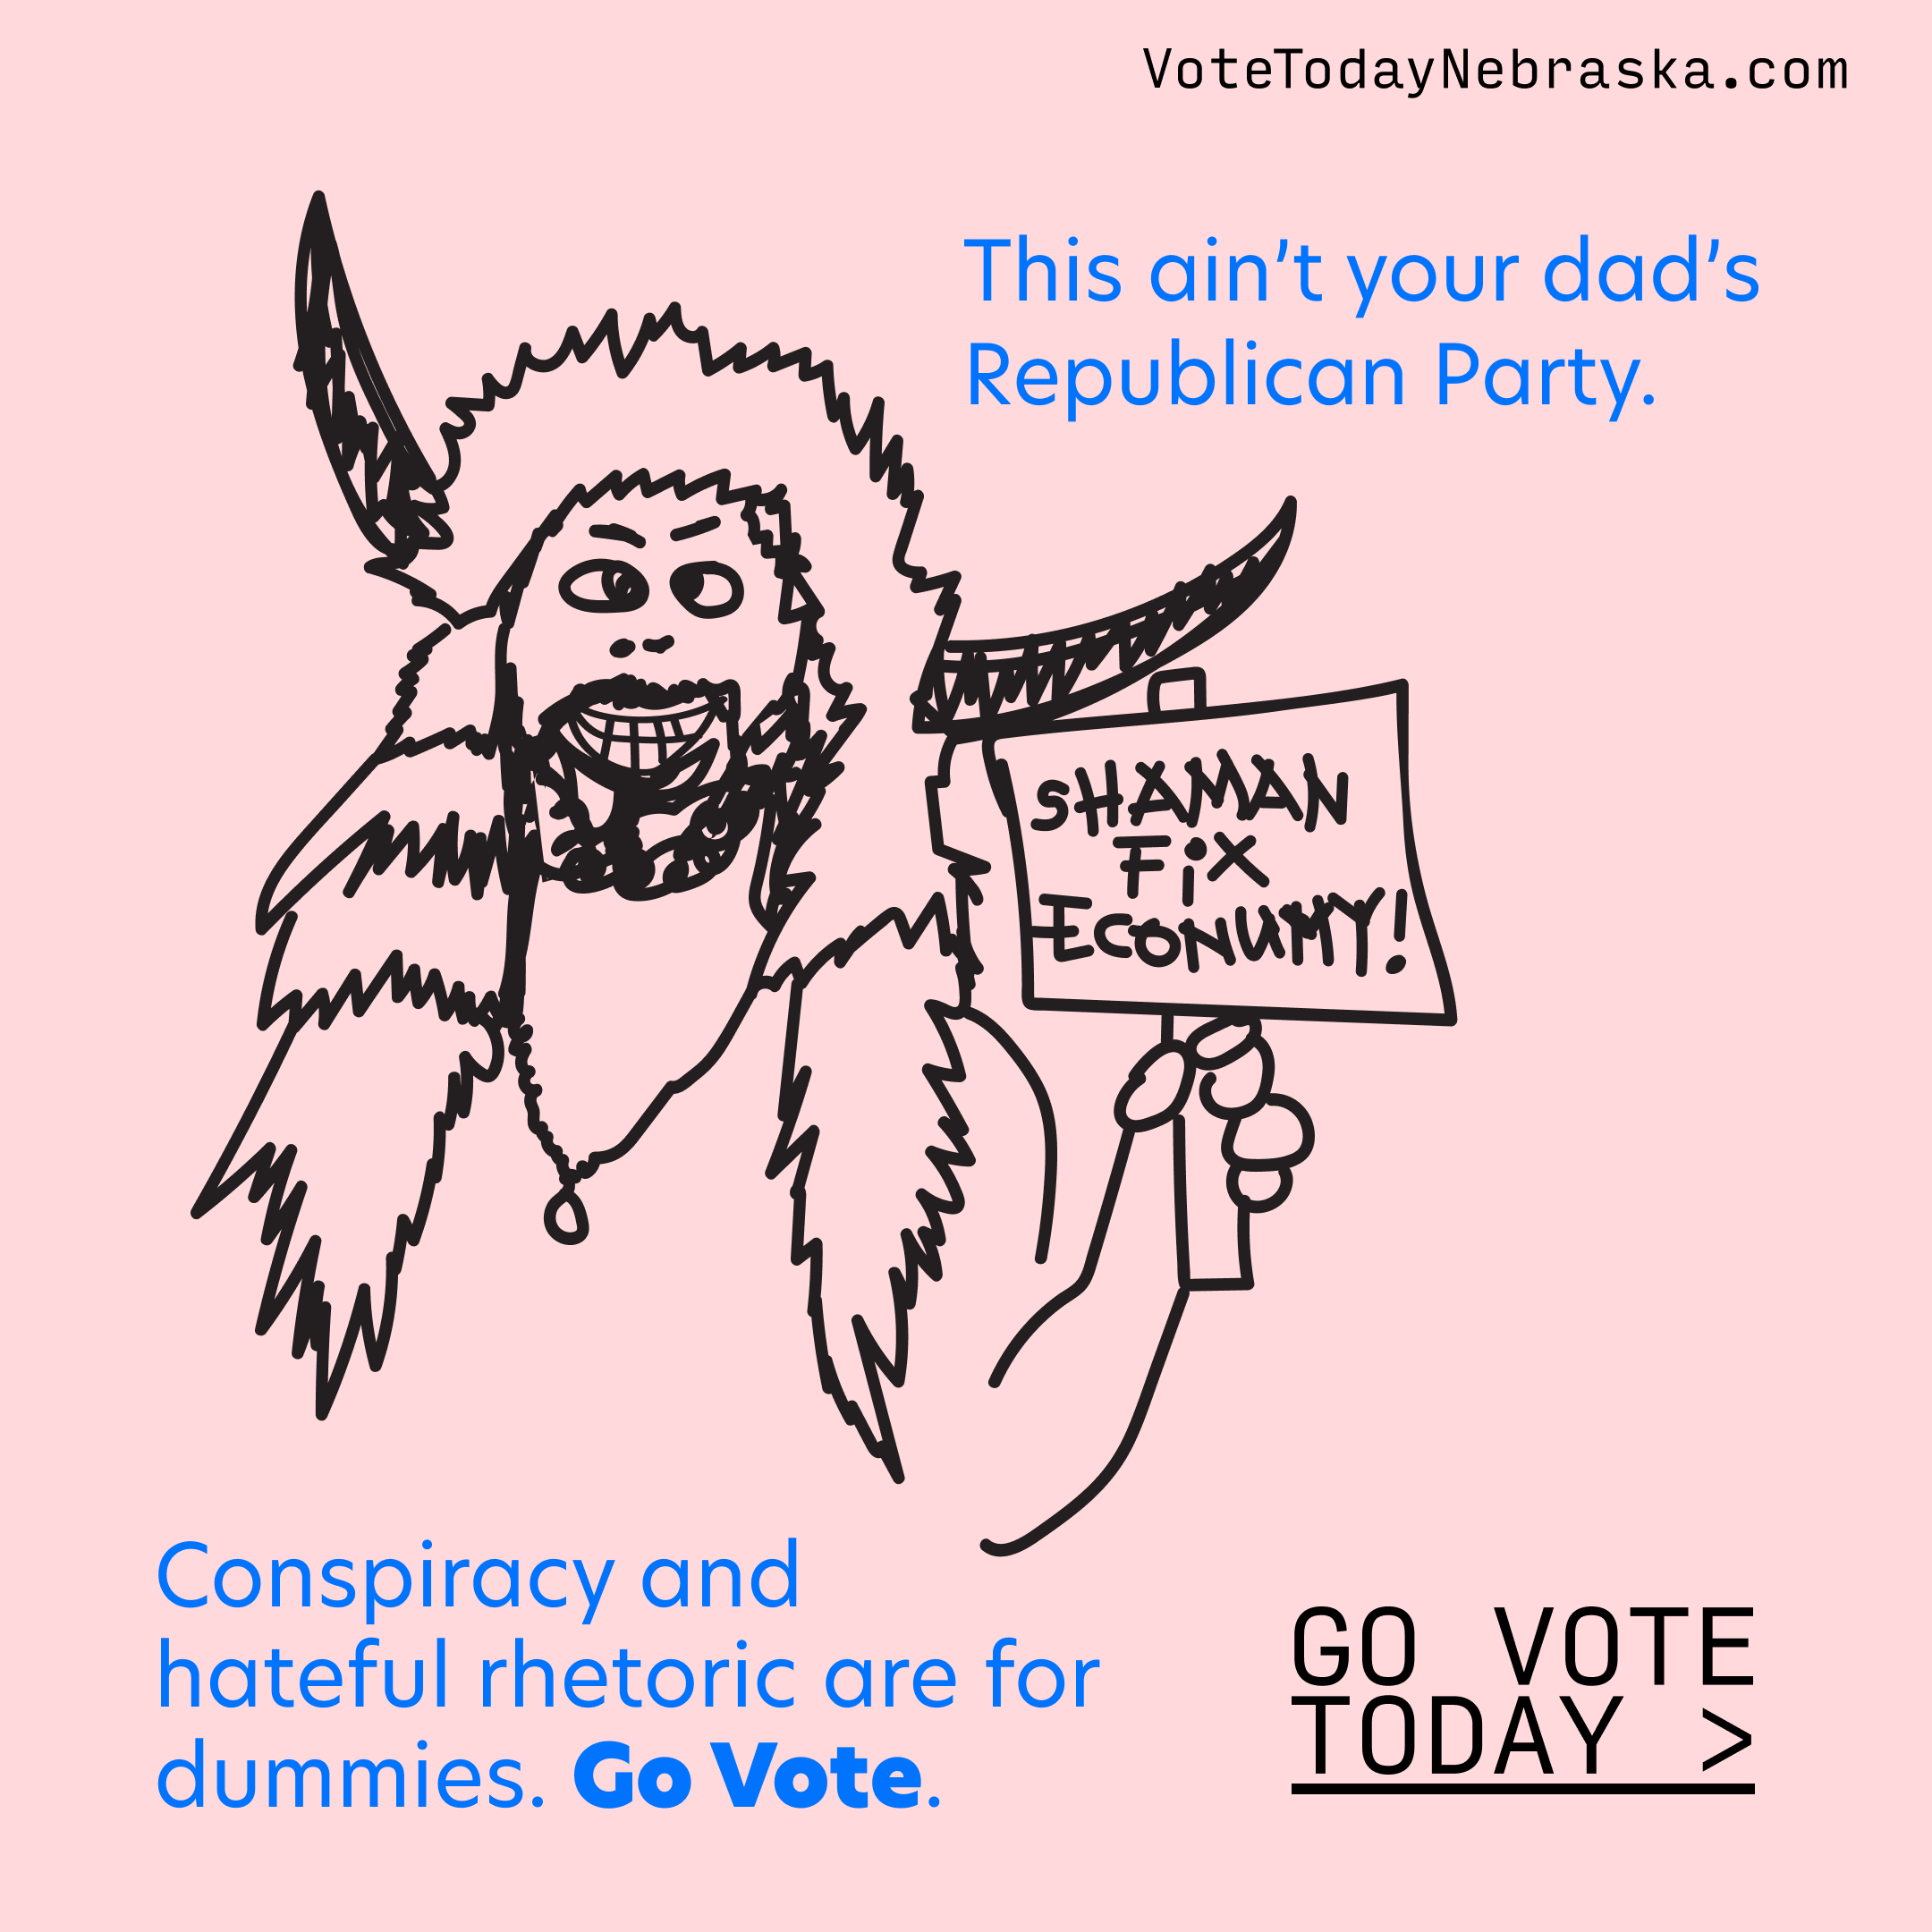 Drawing of the insurrectionist shaman holding a sign SHAMAN FIX ECONUMY! This ain't your dad's Republican Party. Conspiracy and hateful rhetoric are for dummies. Go Vote Today >